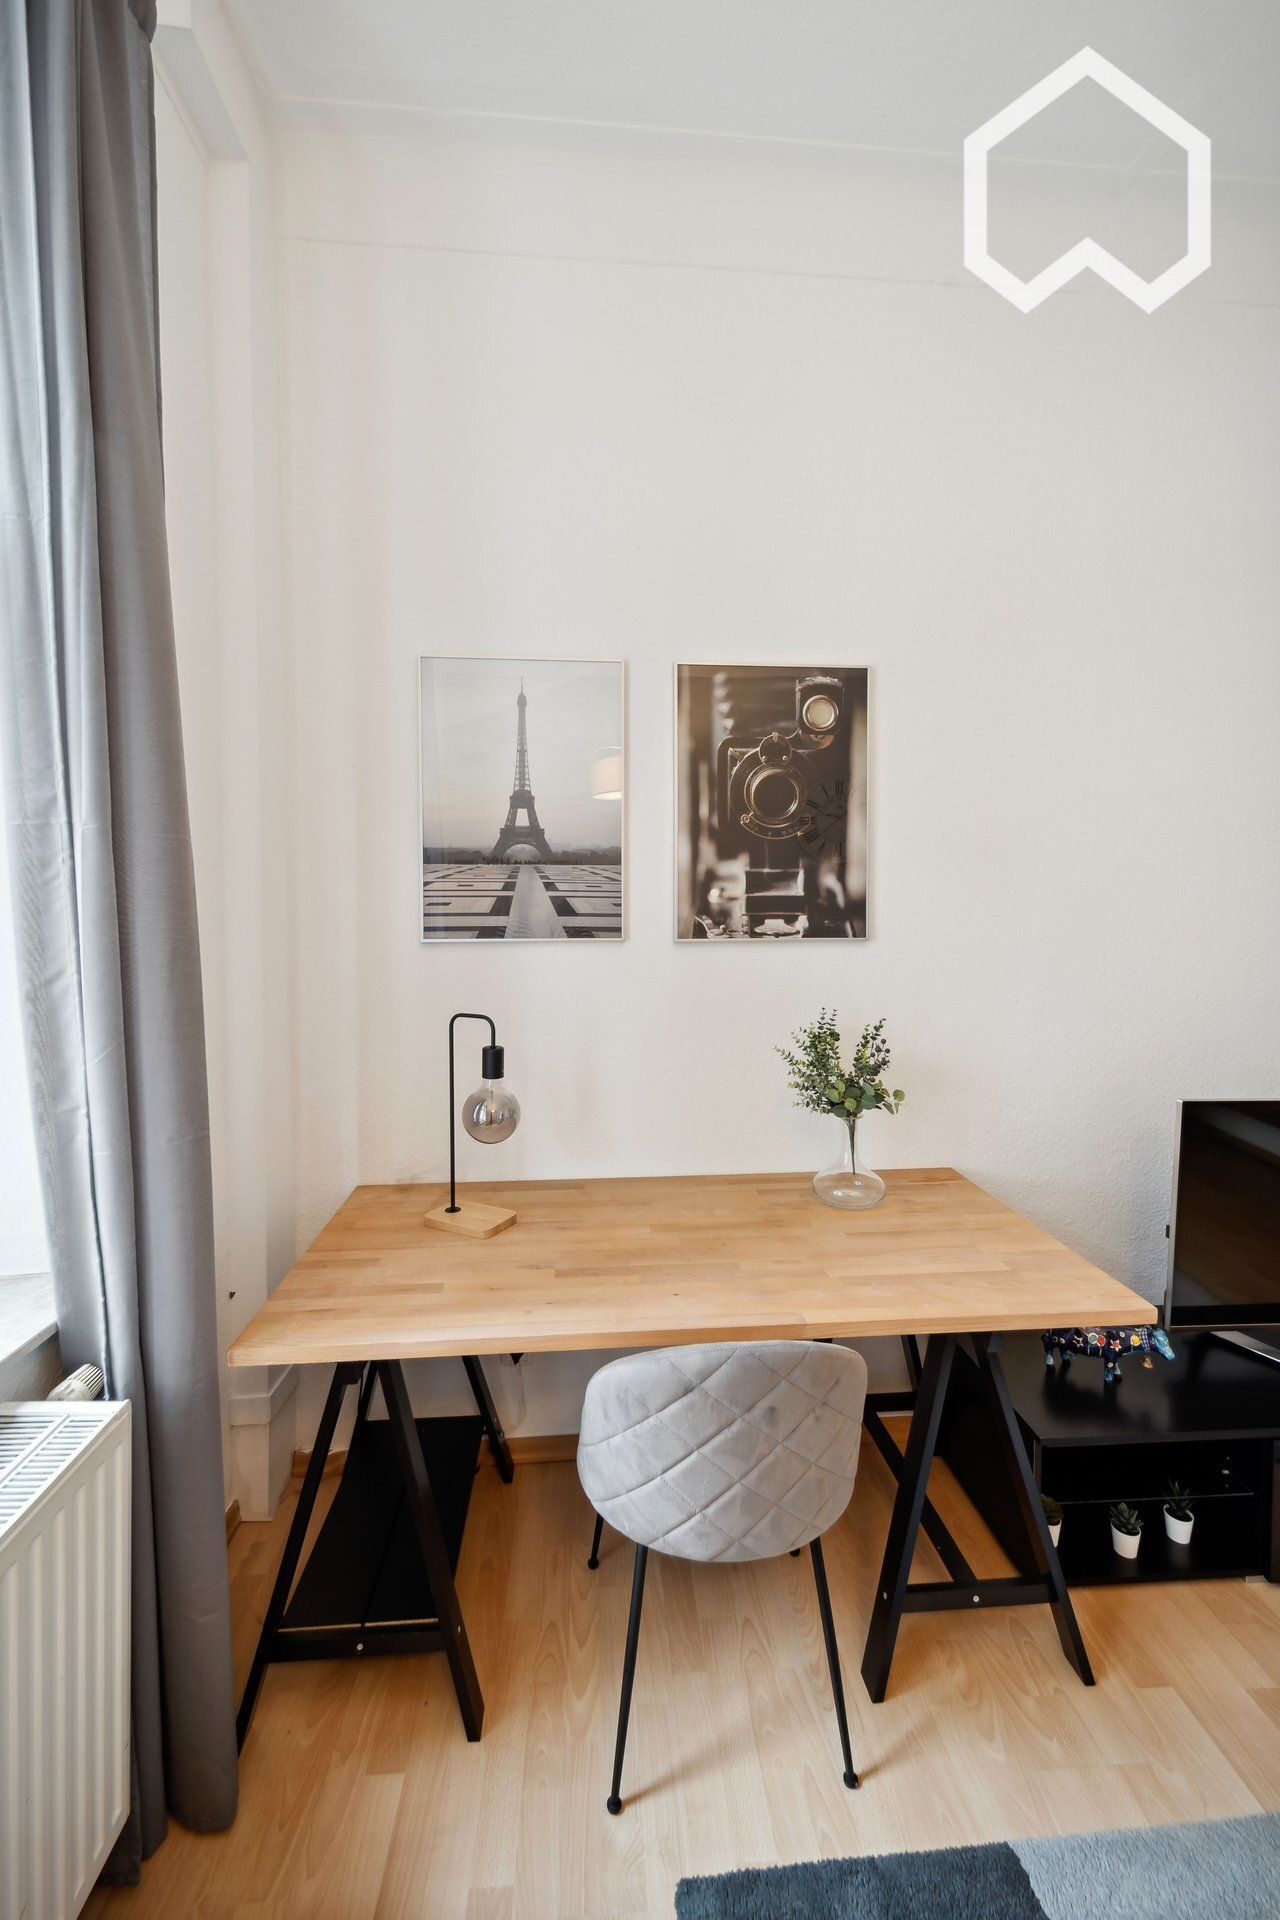 Fashionable apartment in Düsseldorf - Stylishly furnished and equipped!